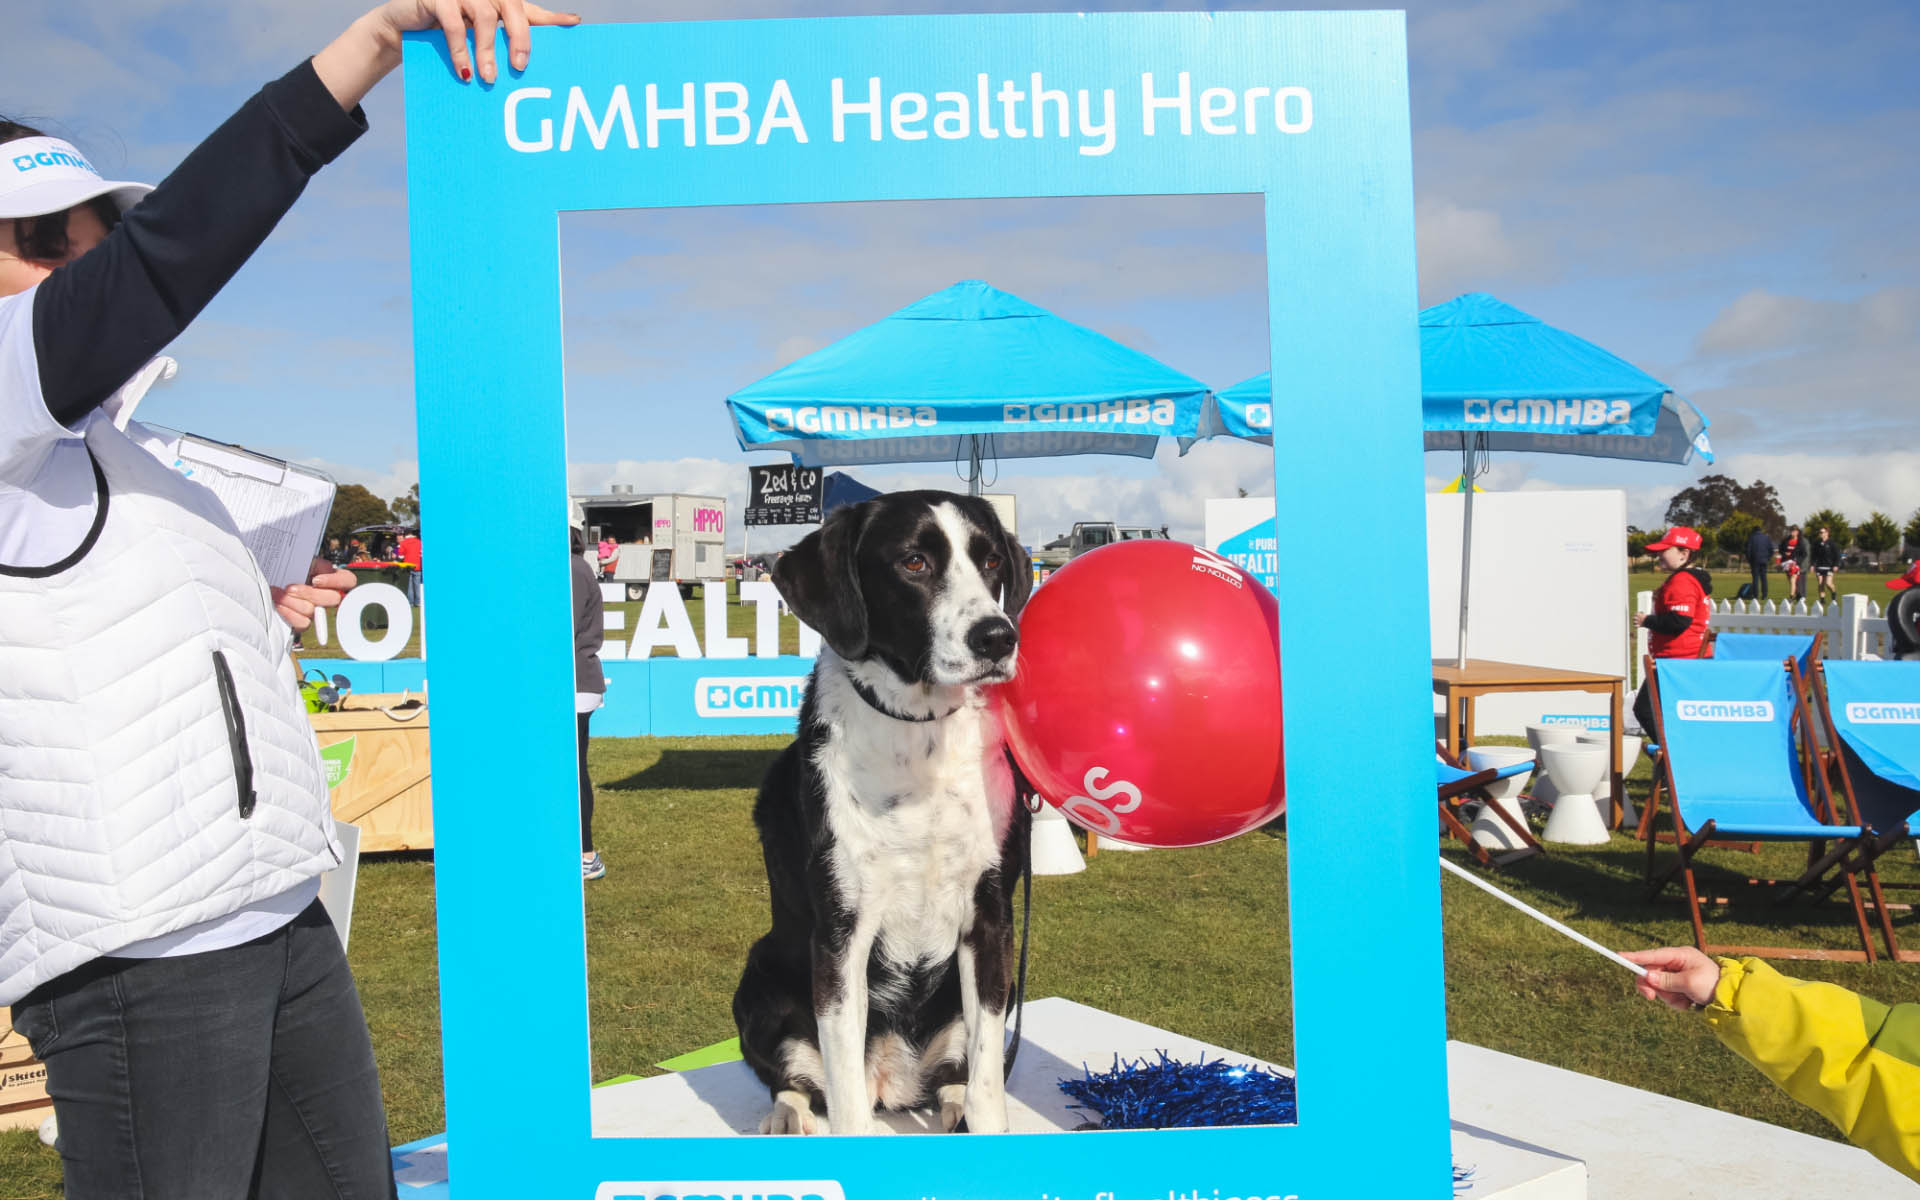 GMHBA event day social media selfie frame with dog shown